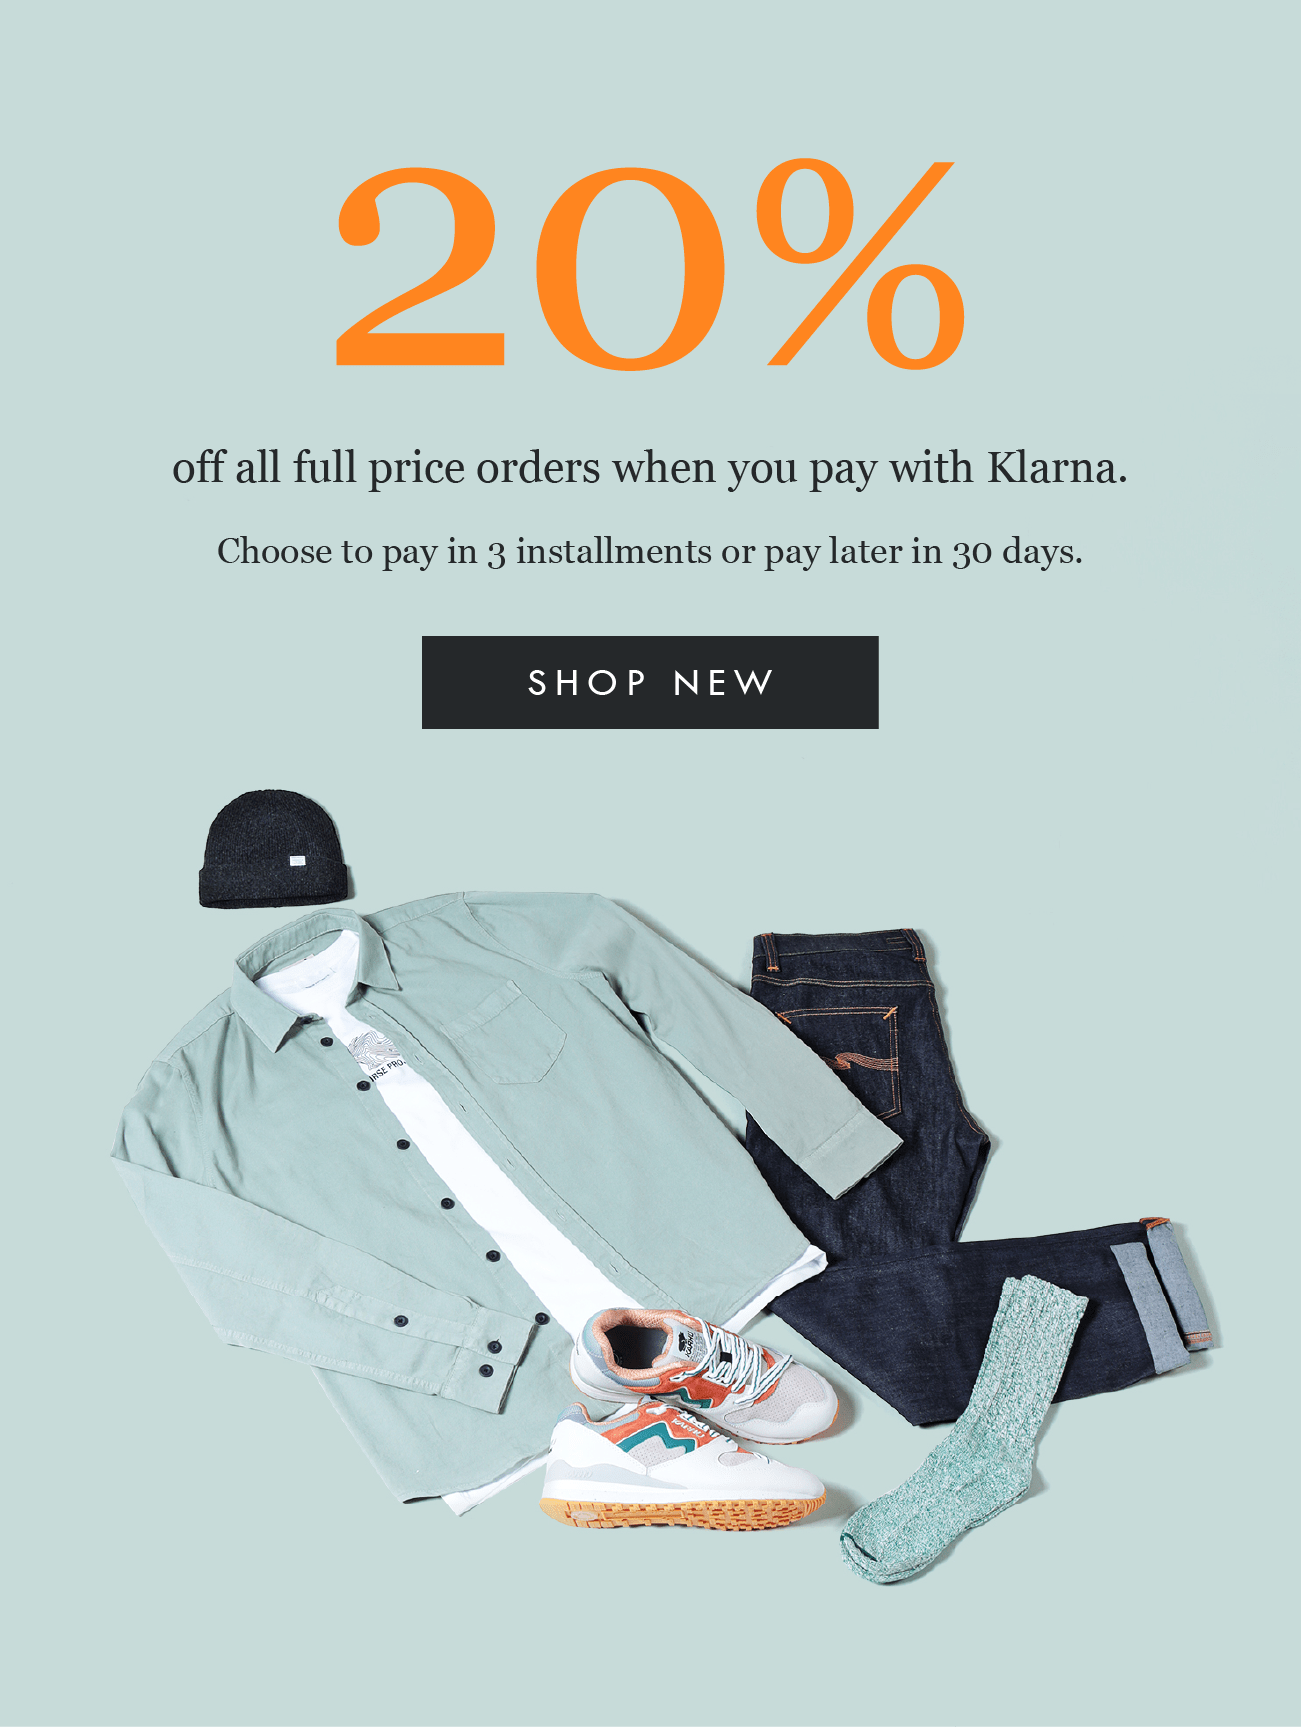 20% off off all full price orders when you pay with Klarna.
Choose to pay in 3 installments or pay later in 30 days. Shop new